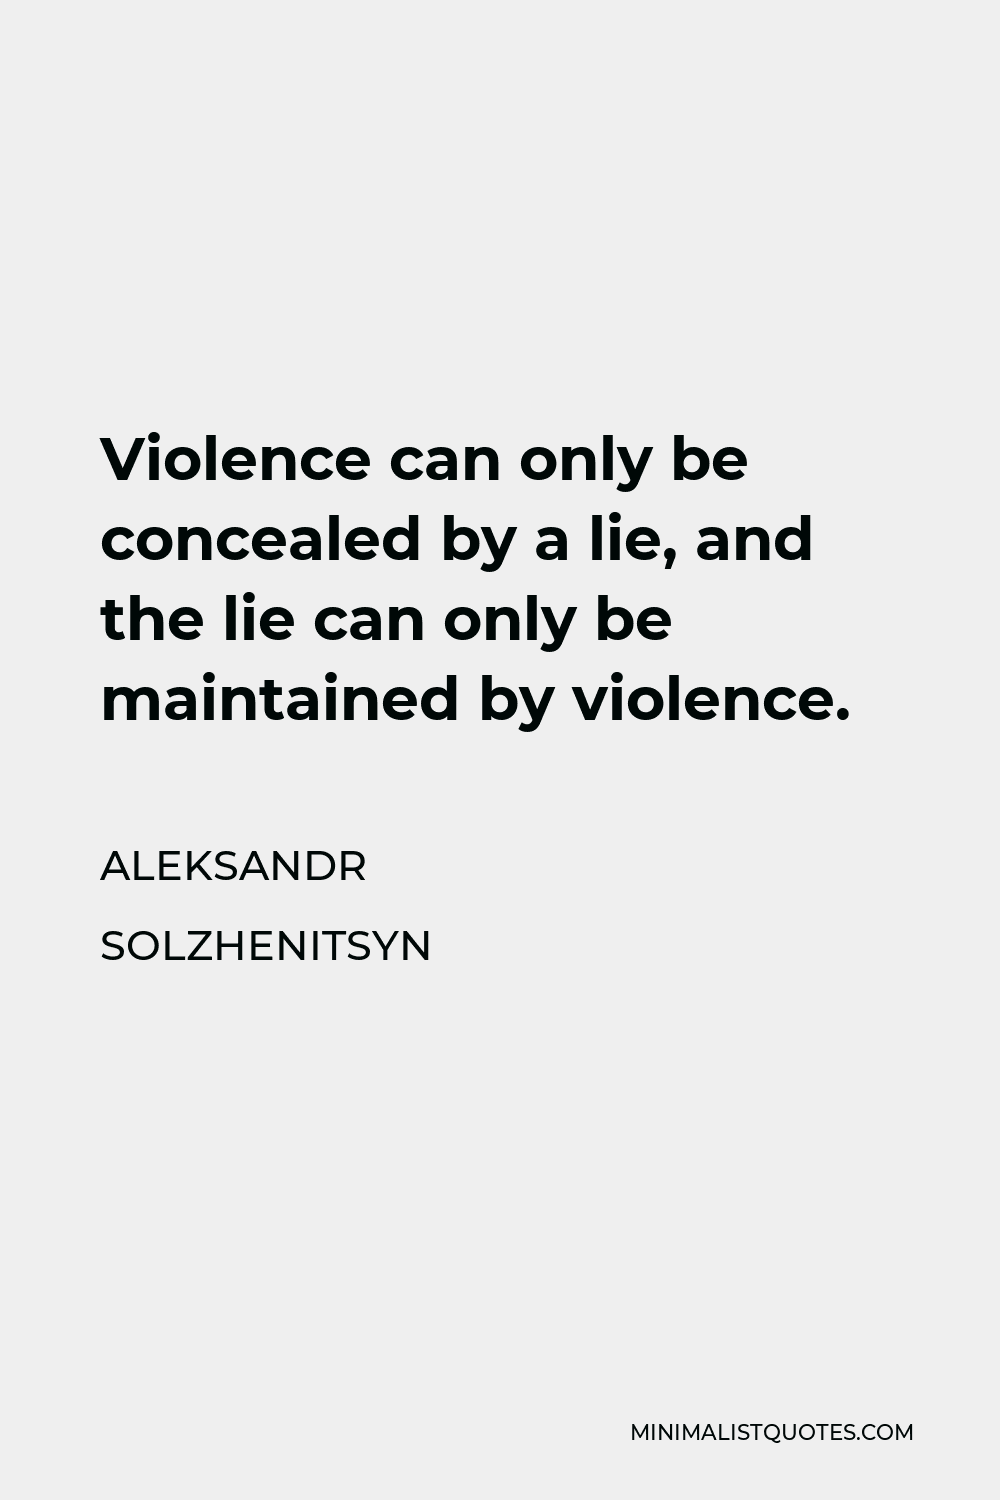 Aleksandr Solzhenitsyn Quote - Violence can only be concealed by a lie, and the lie can only be maintained by violence.